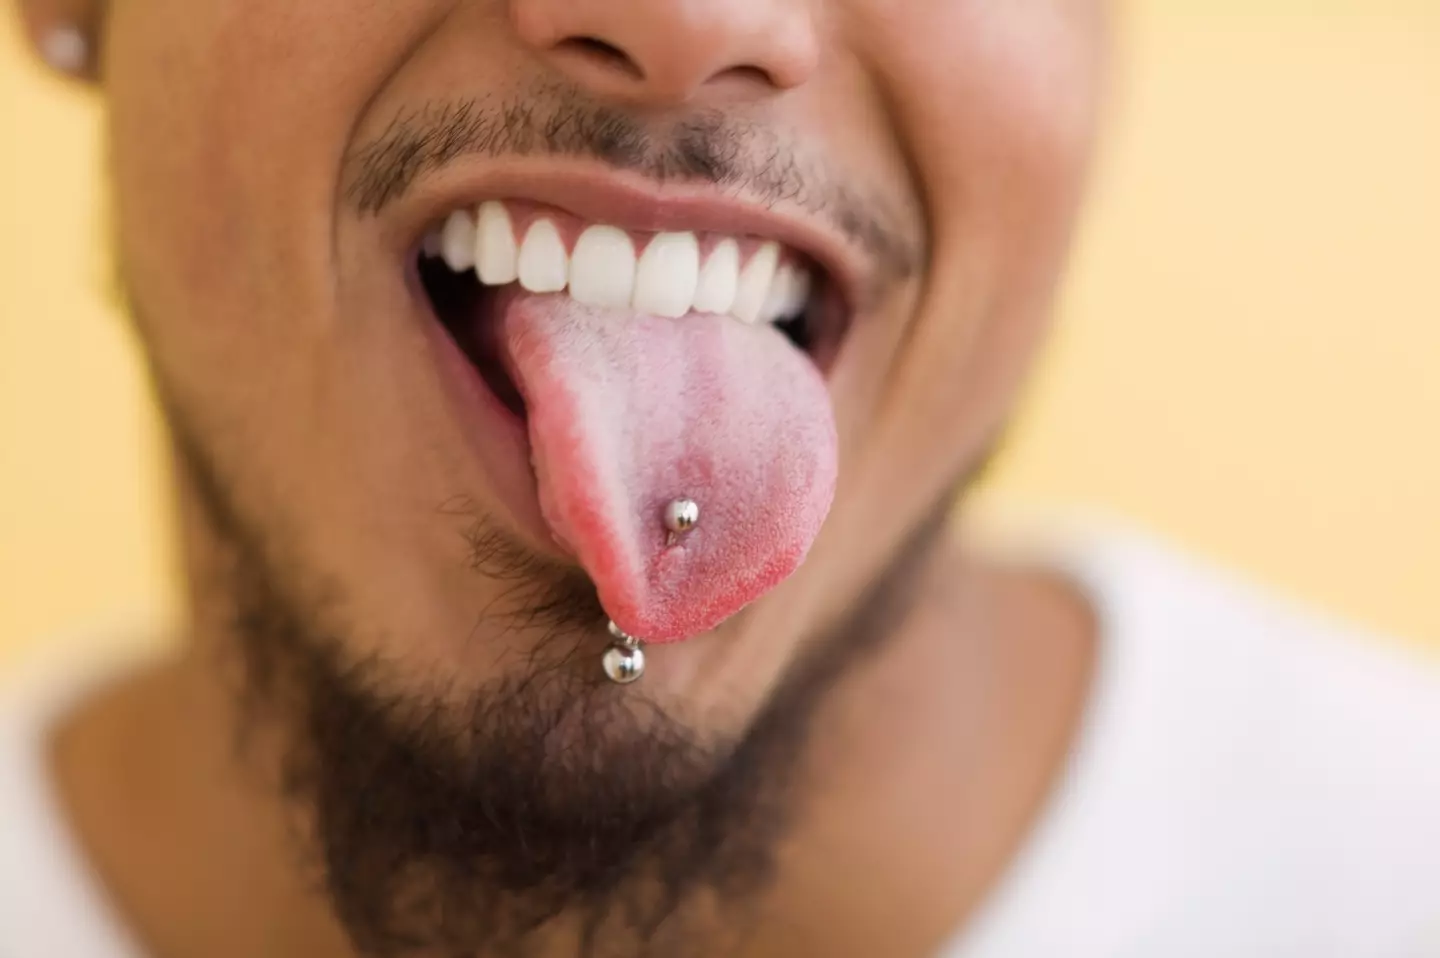 Say goodbye to your tongues (Jose Luis Pelaez Inc / Getty Images)